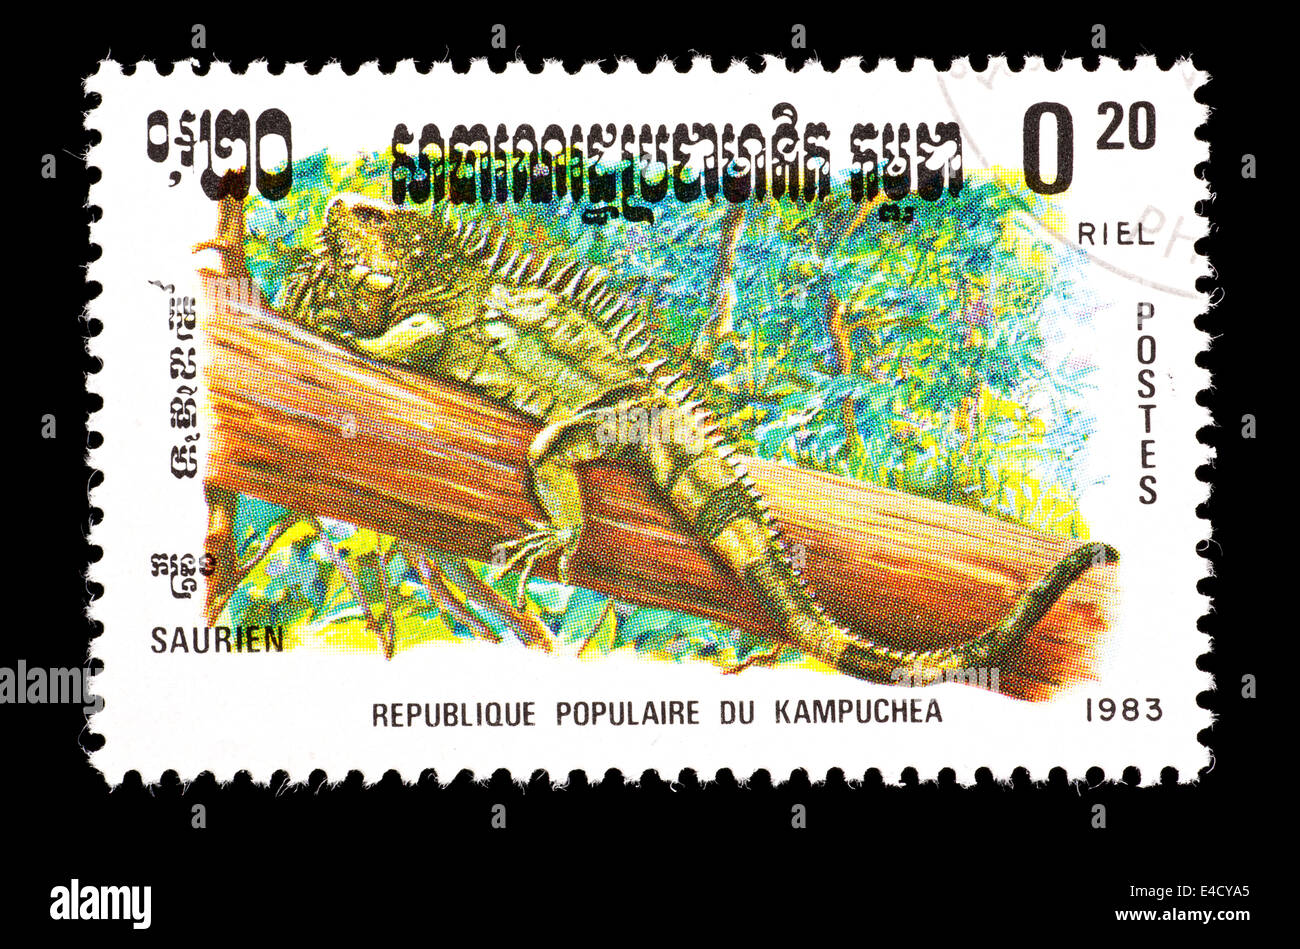 Postage stamp from Cambodia (Kampuchea) depicting a striped lizard. Stock Photo